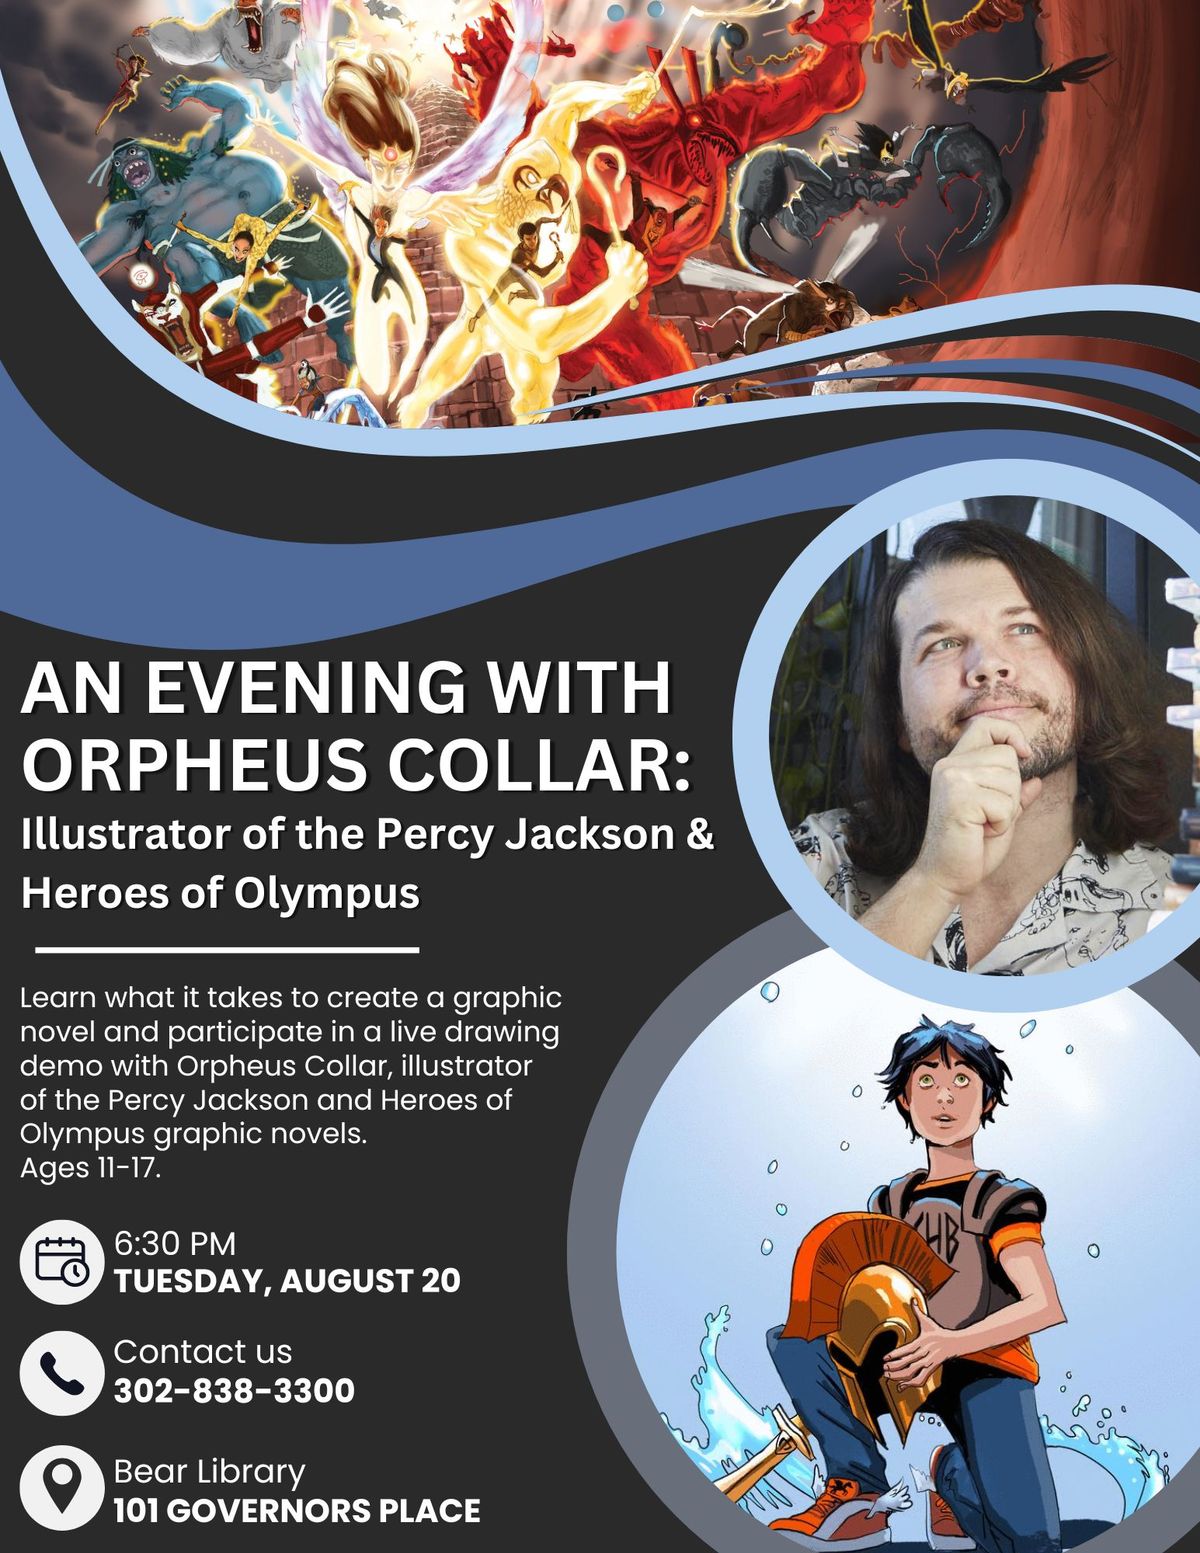 An Evening with Orpheus Collar: Illustrator of the Percy Jackson & Heroes of Olympus